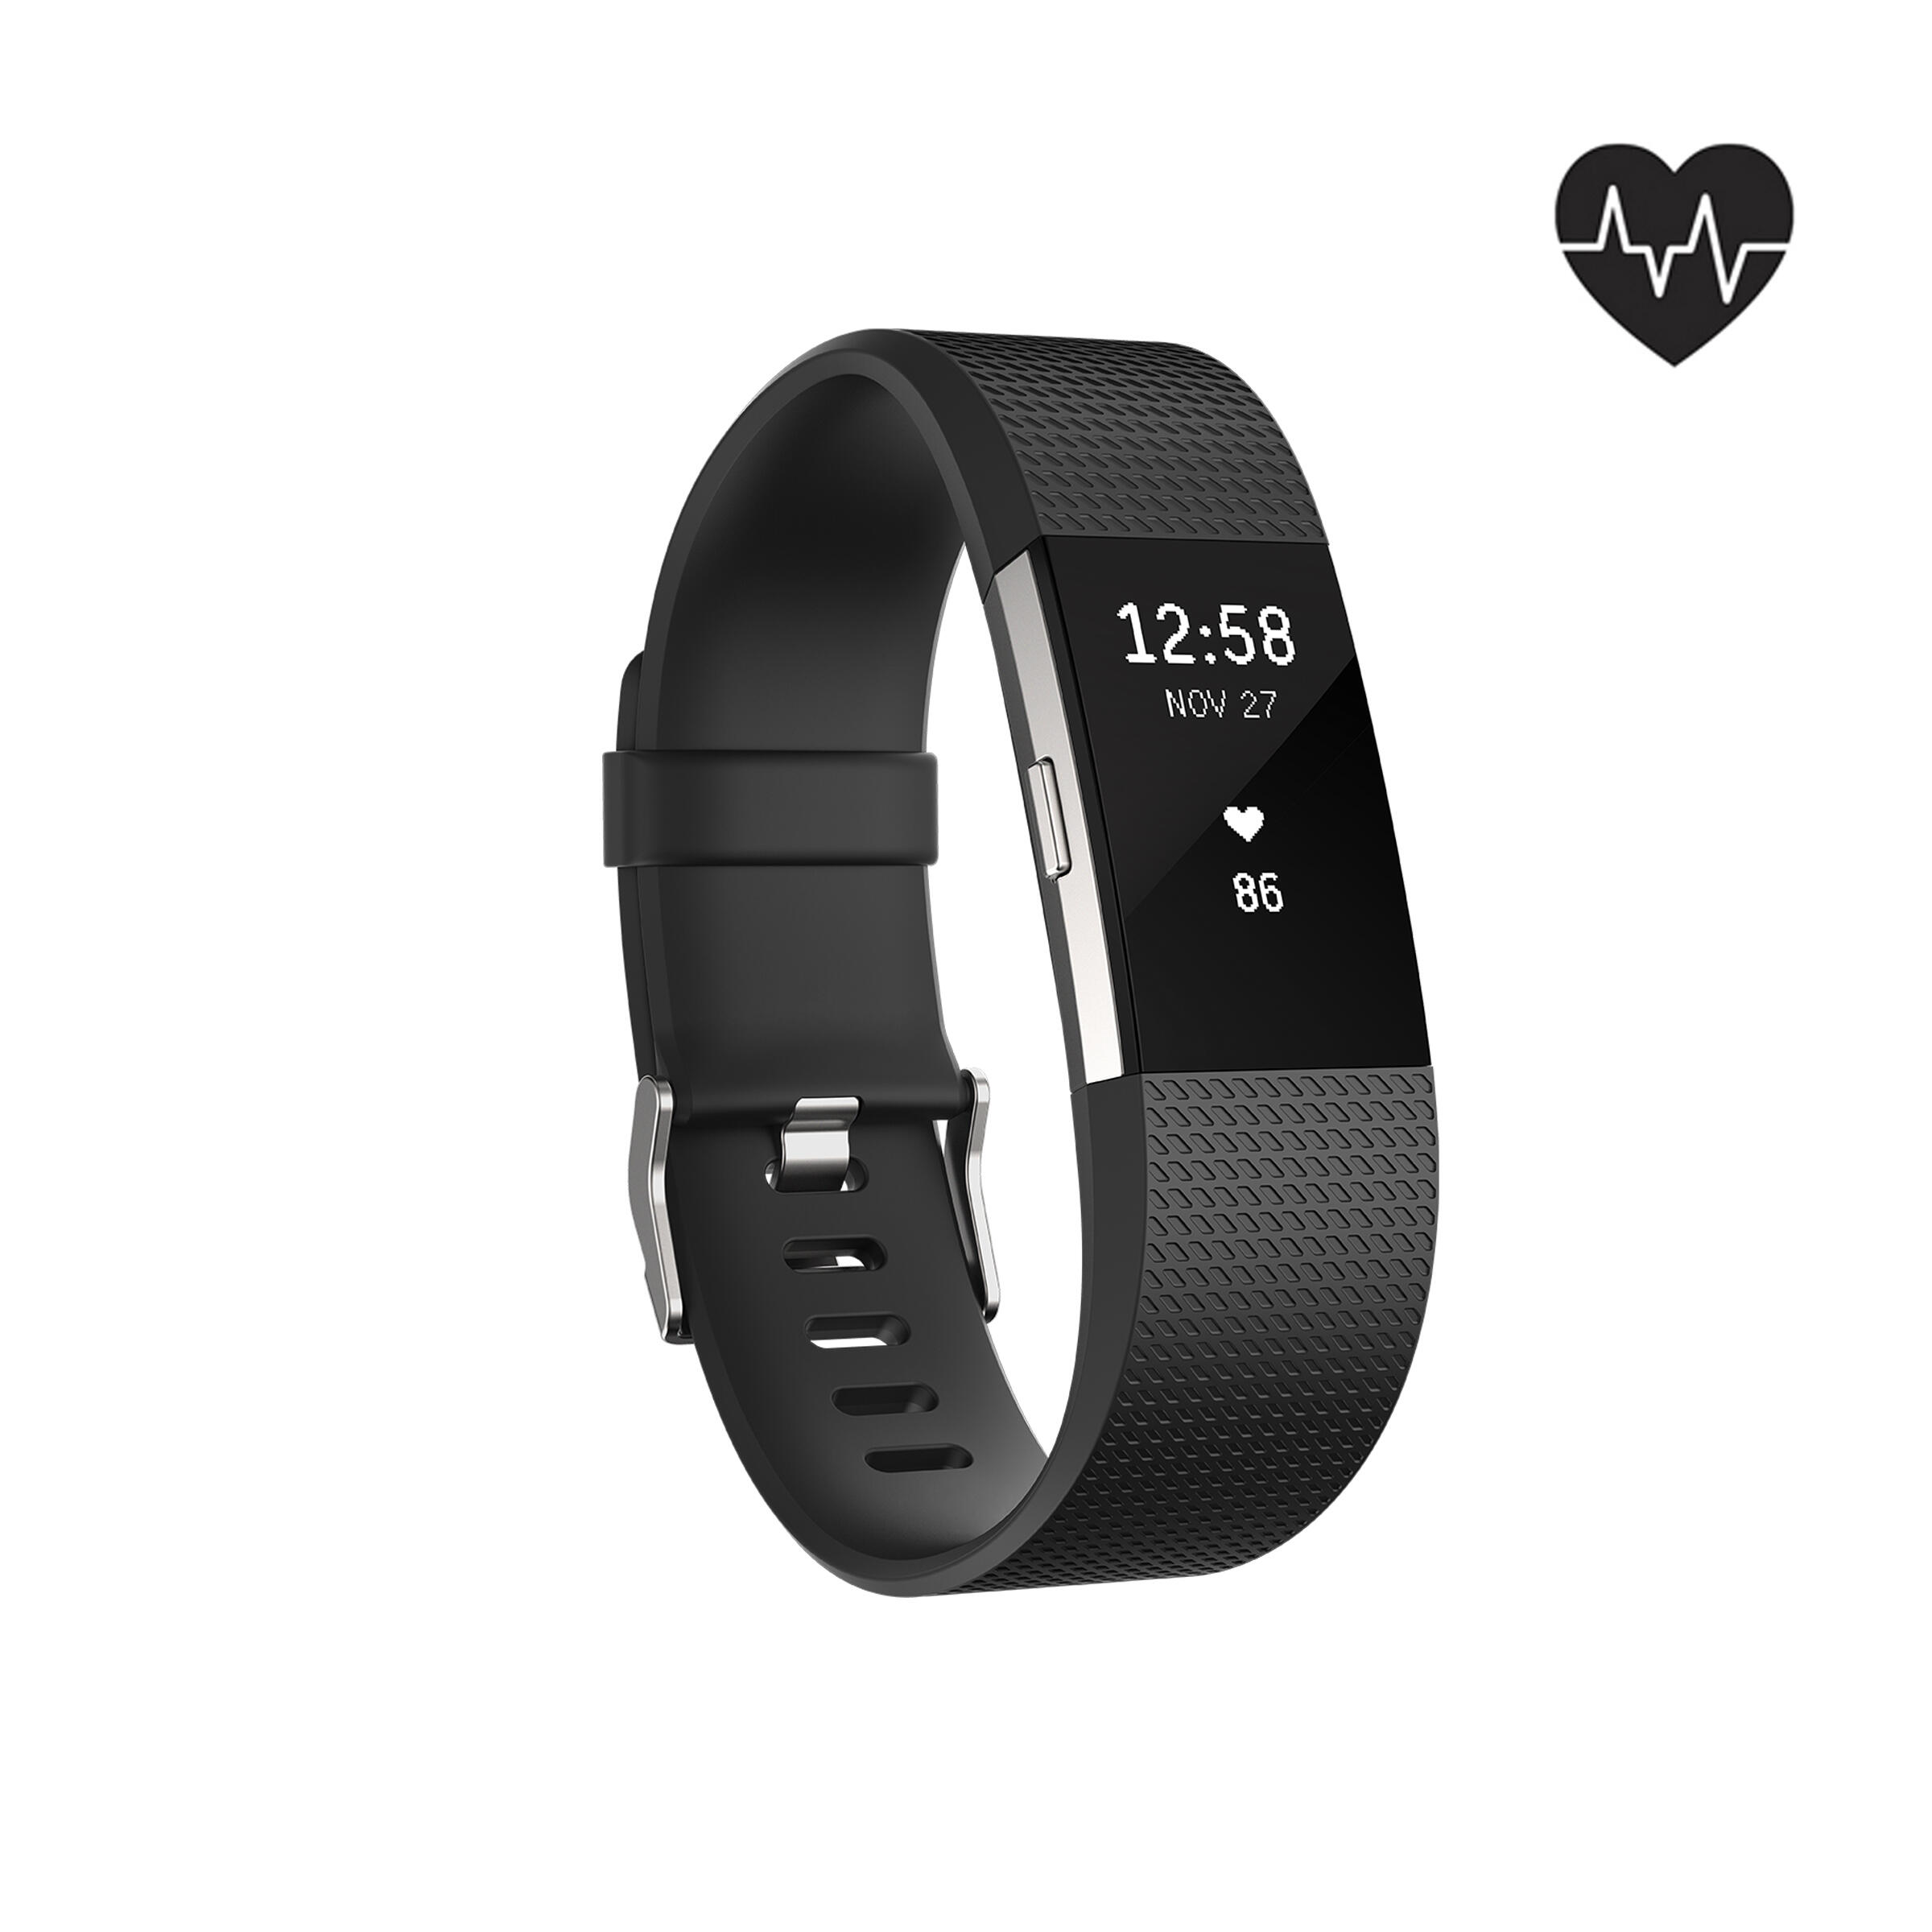 Fitbit Charge 2 Activity Tracker Wristband With Heart Rate On The Wrist Black (size L)